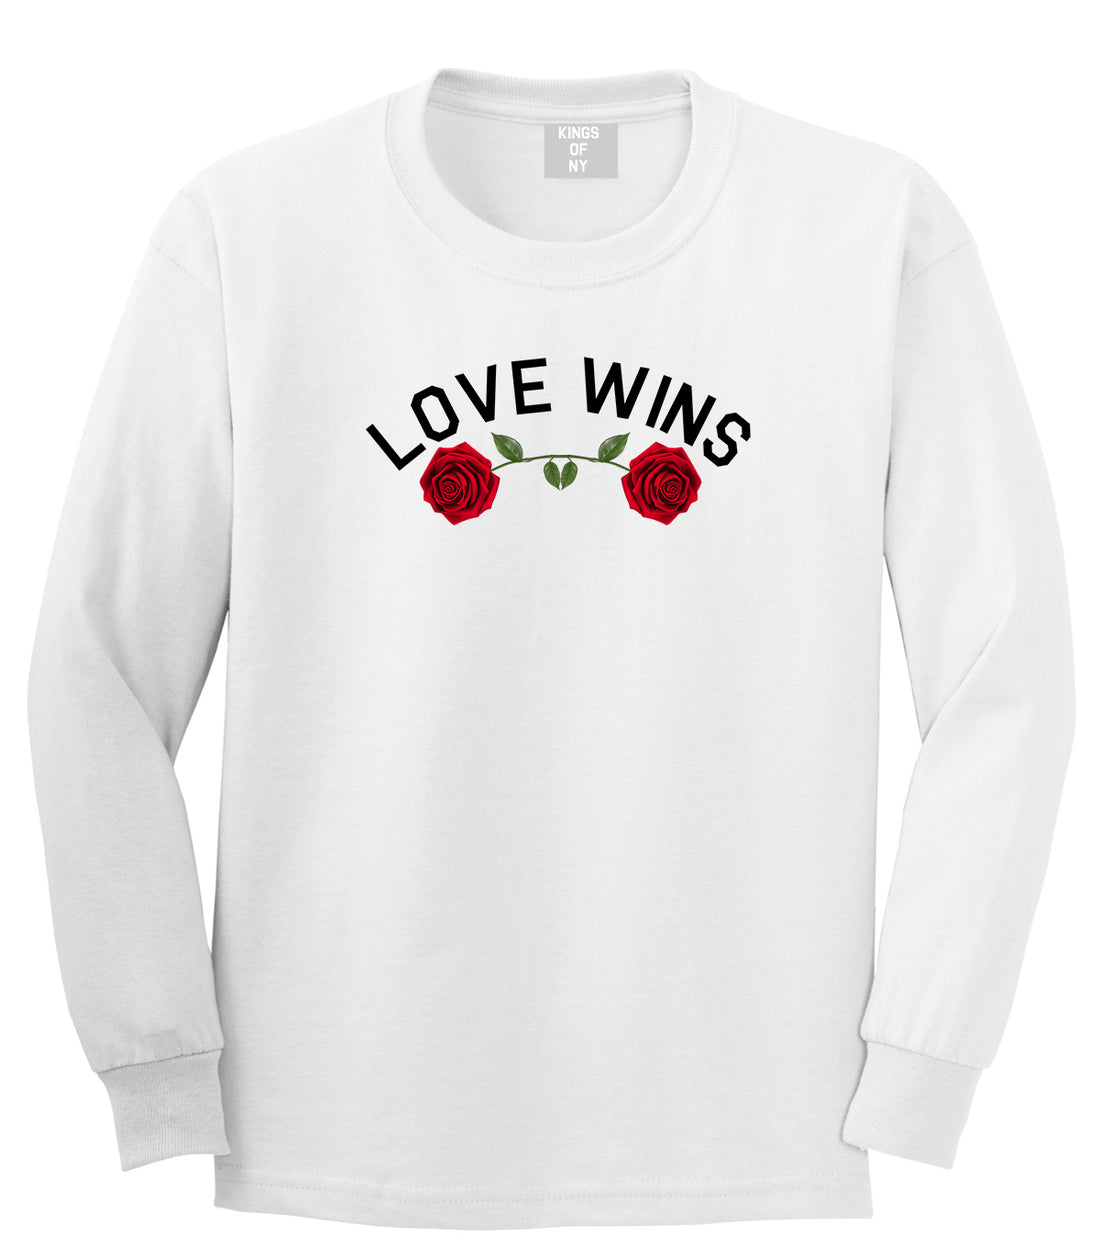 Love Wins Rose Mens Long Sleeve T-Shirt White by Kings Of NY